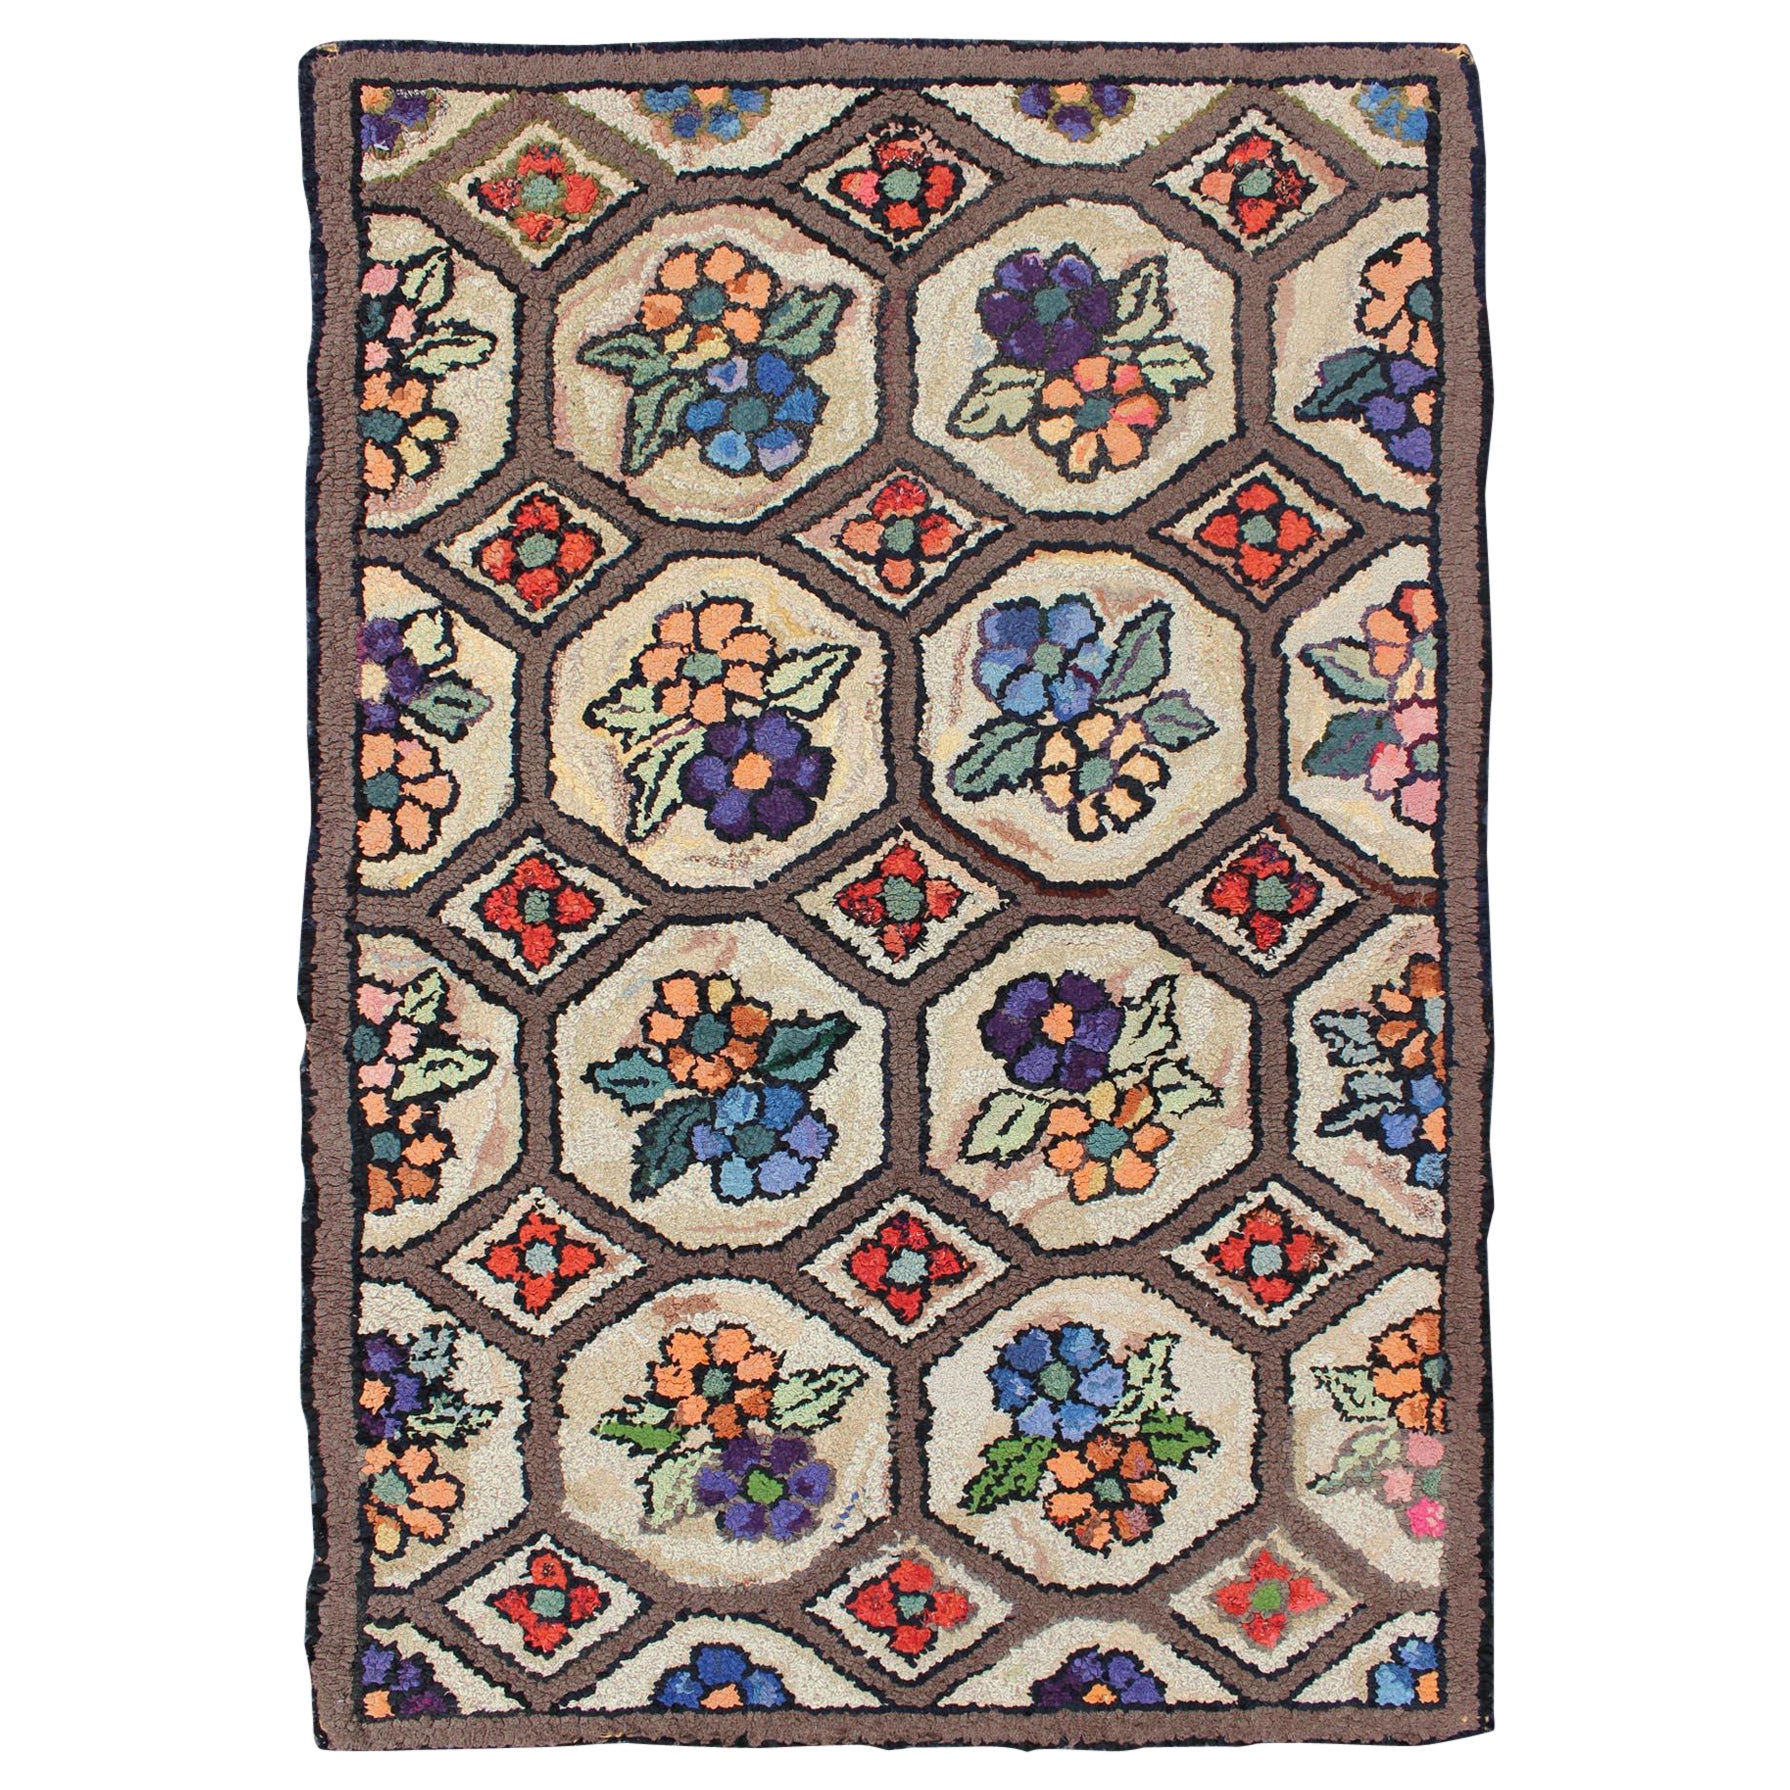 Outstanding Antique American Hooked Rug with All-Over Floral Design For Sale